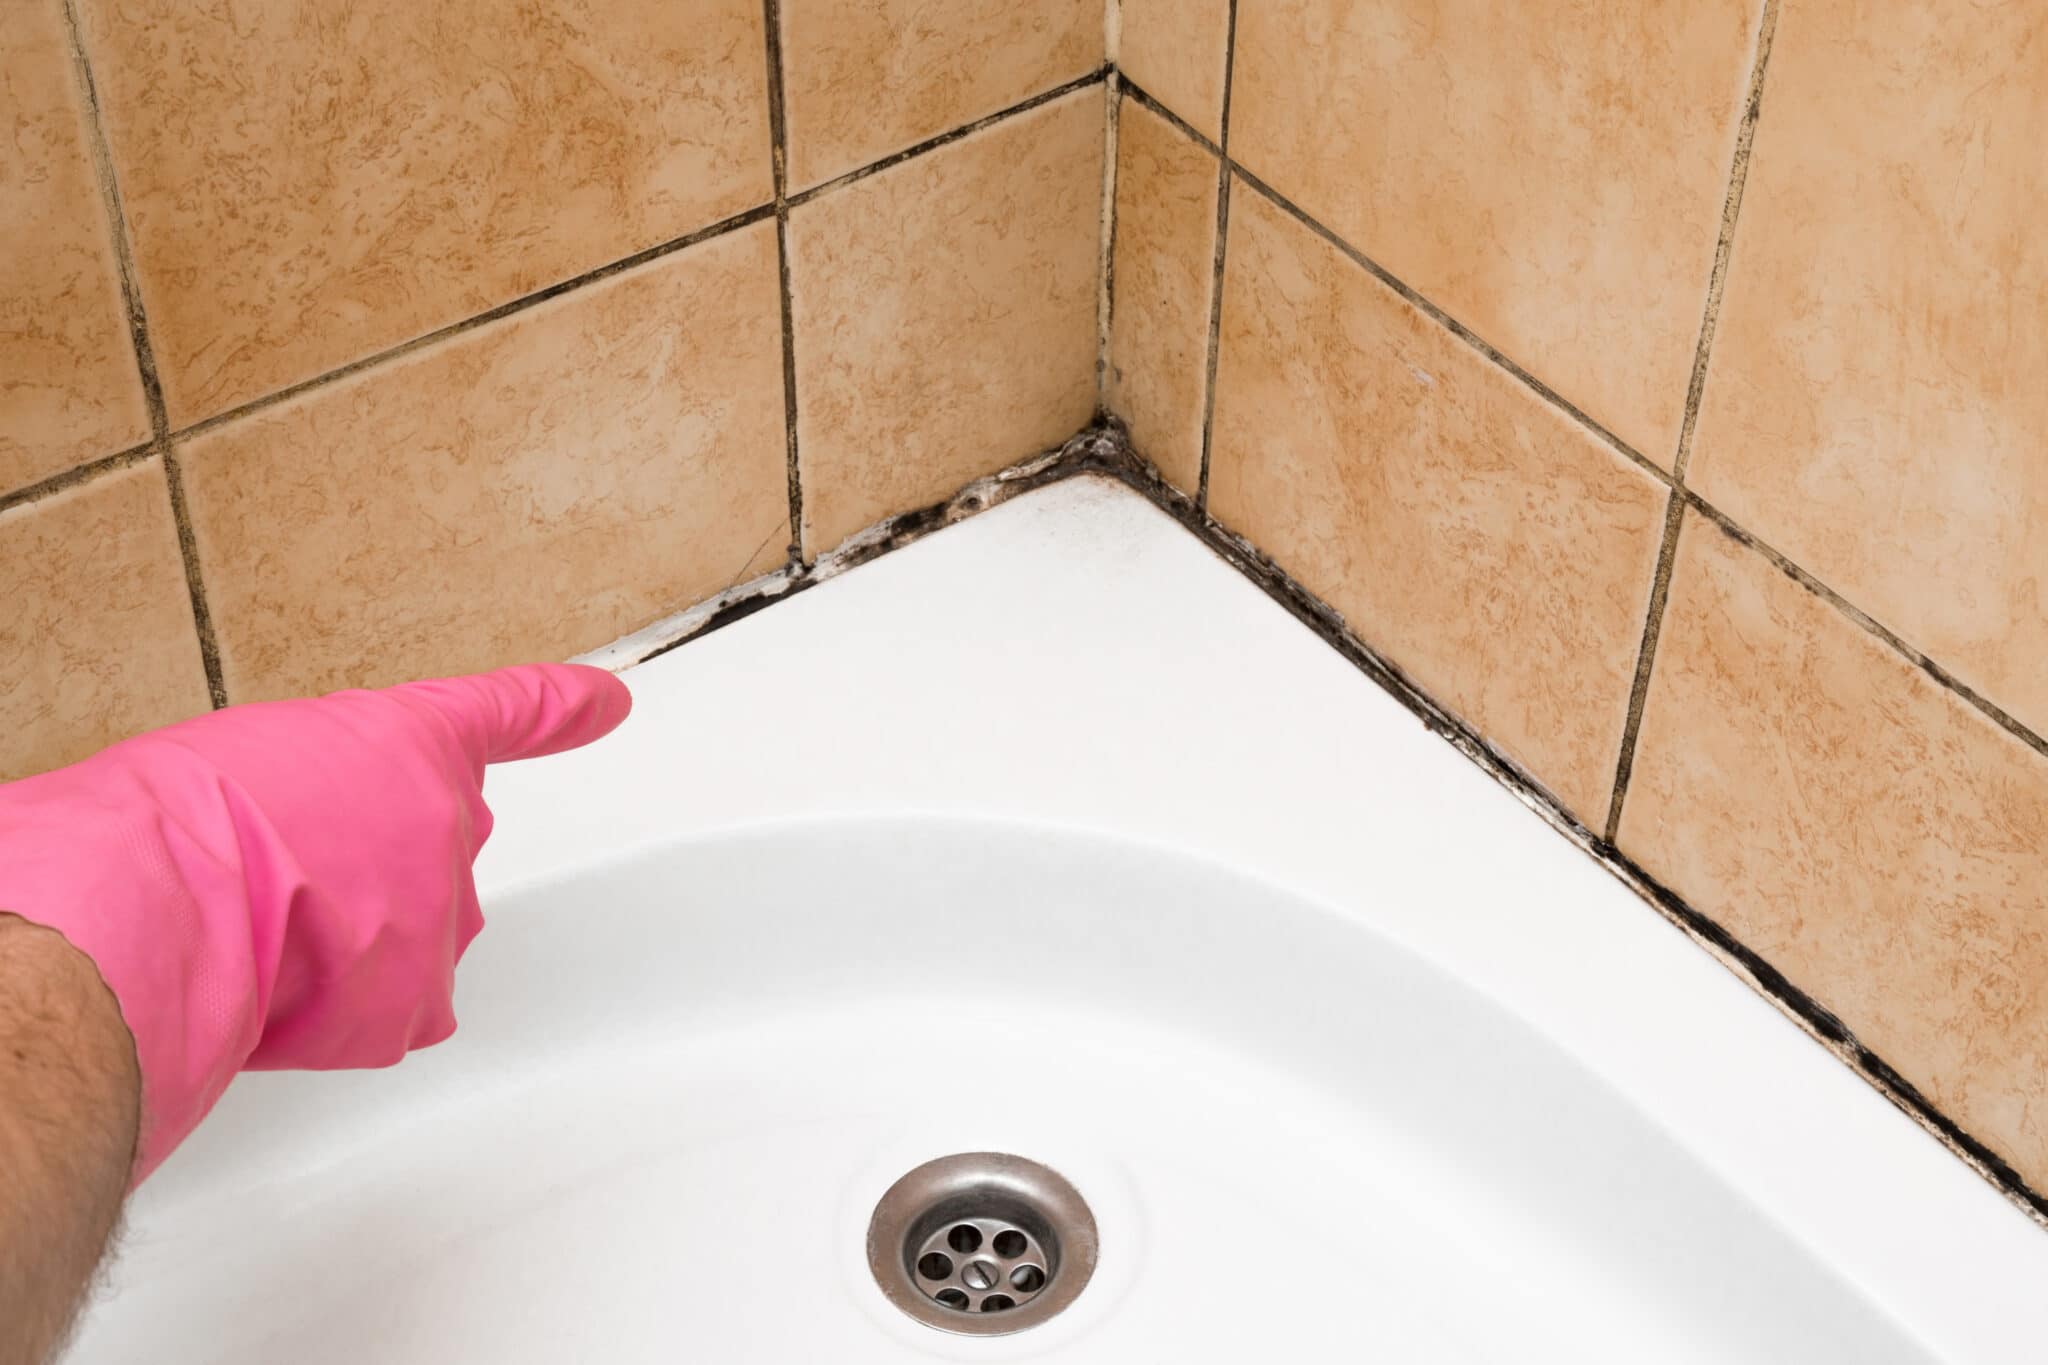 How to clean bathroom tile grout: Home remedies to banish mould